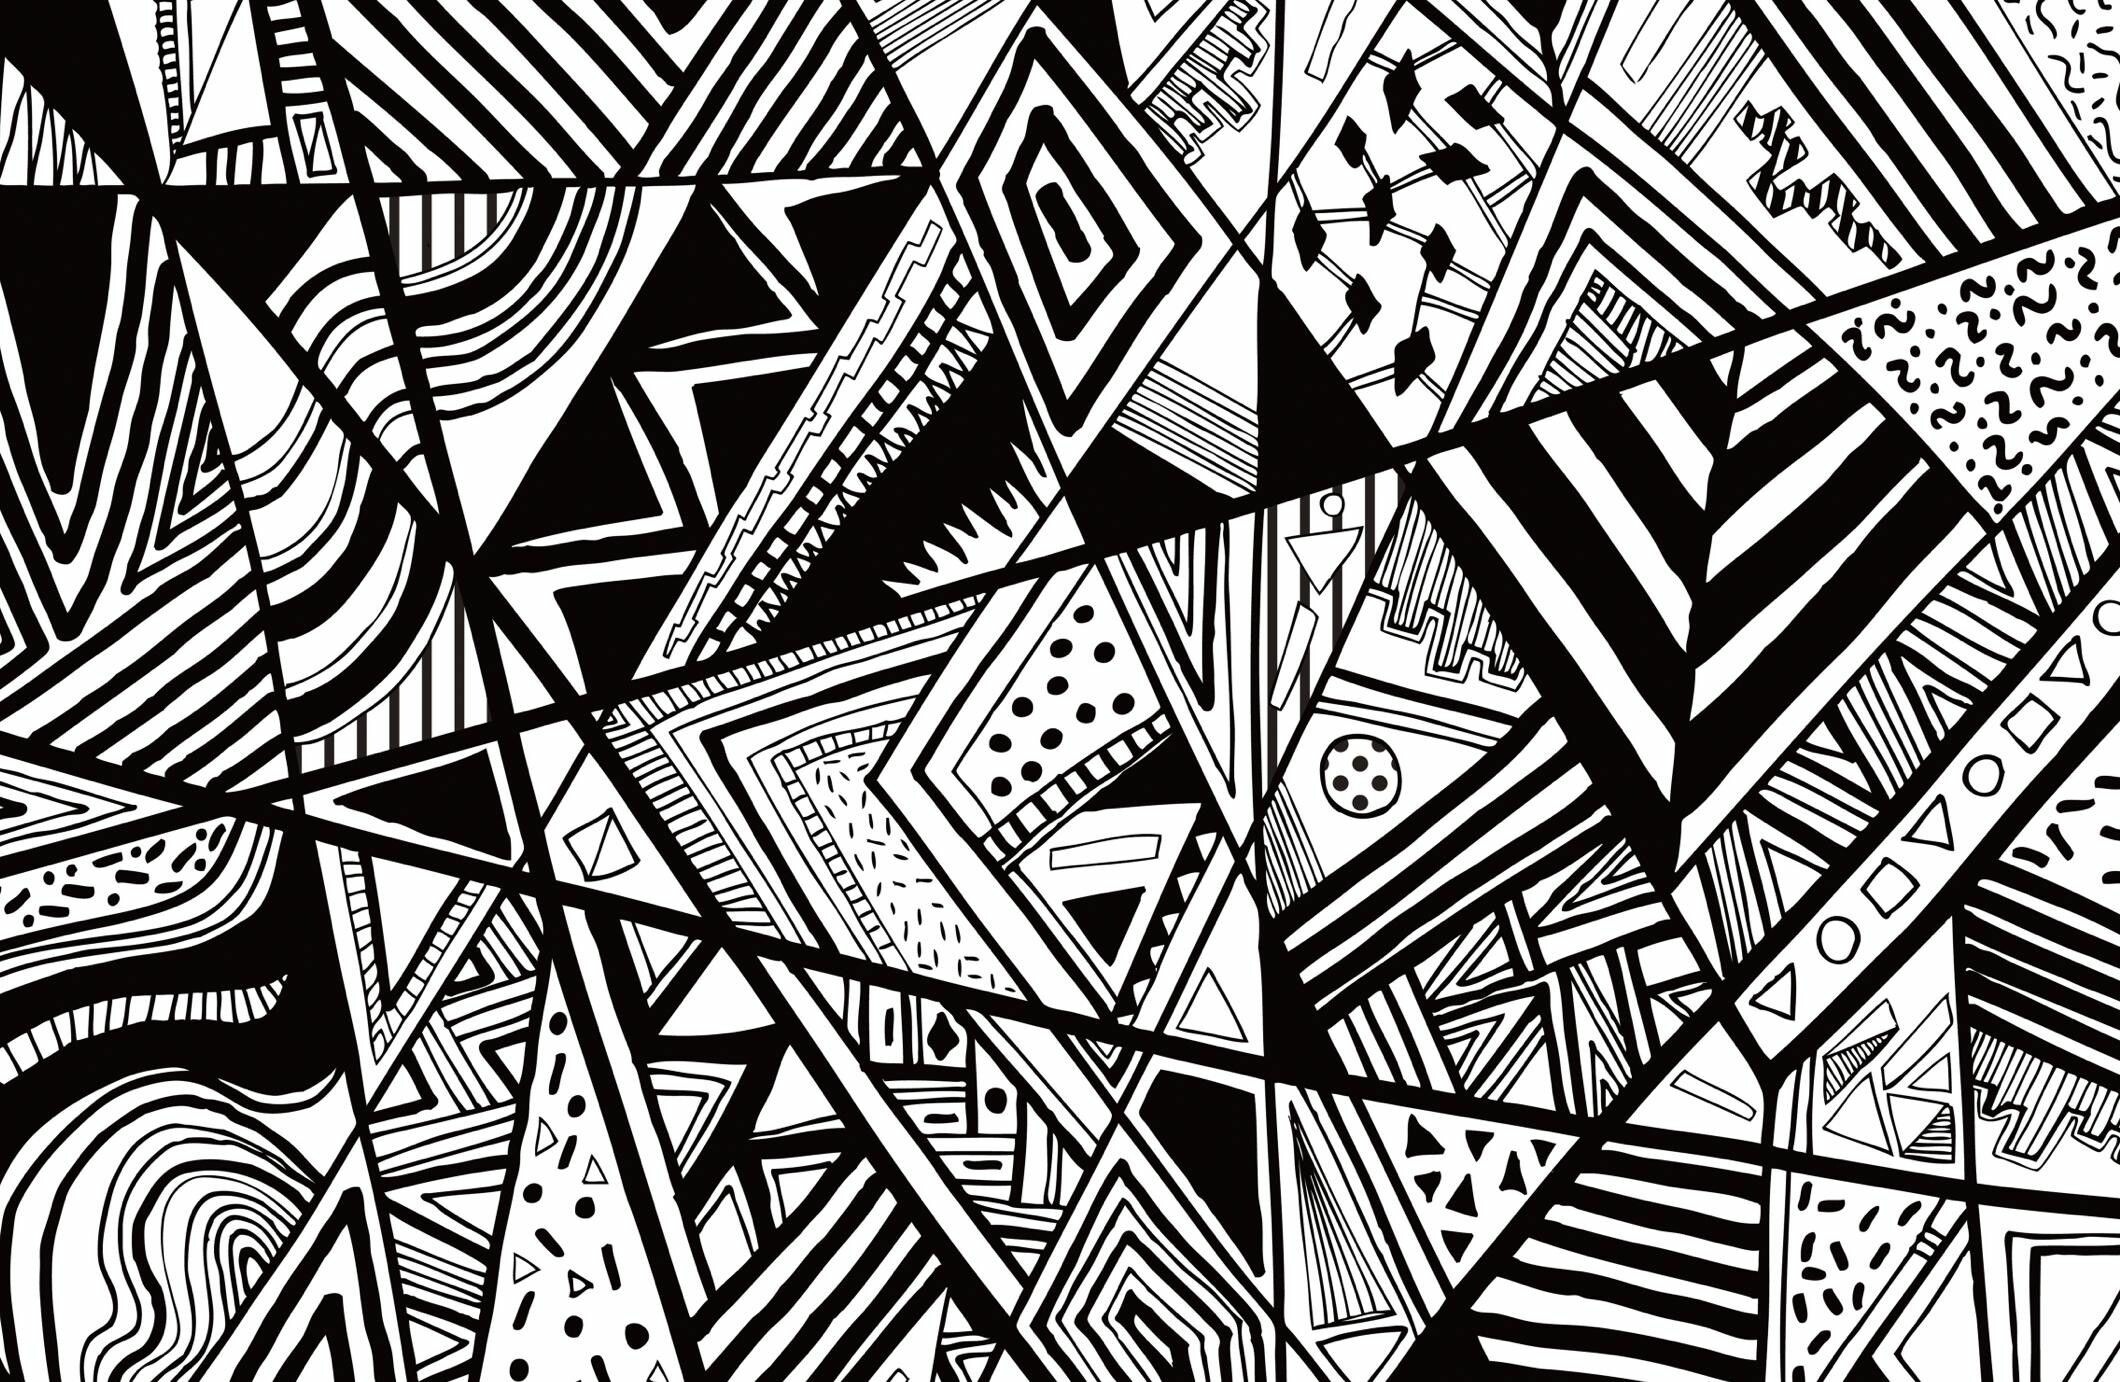 46+ Black and White Abstract Wallpapers: HD, 4K, 5K for PC and Mobile |  Download free images for iPhone, Android